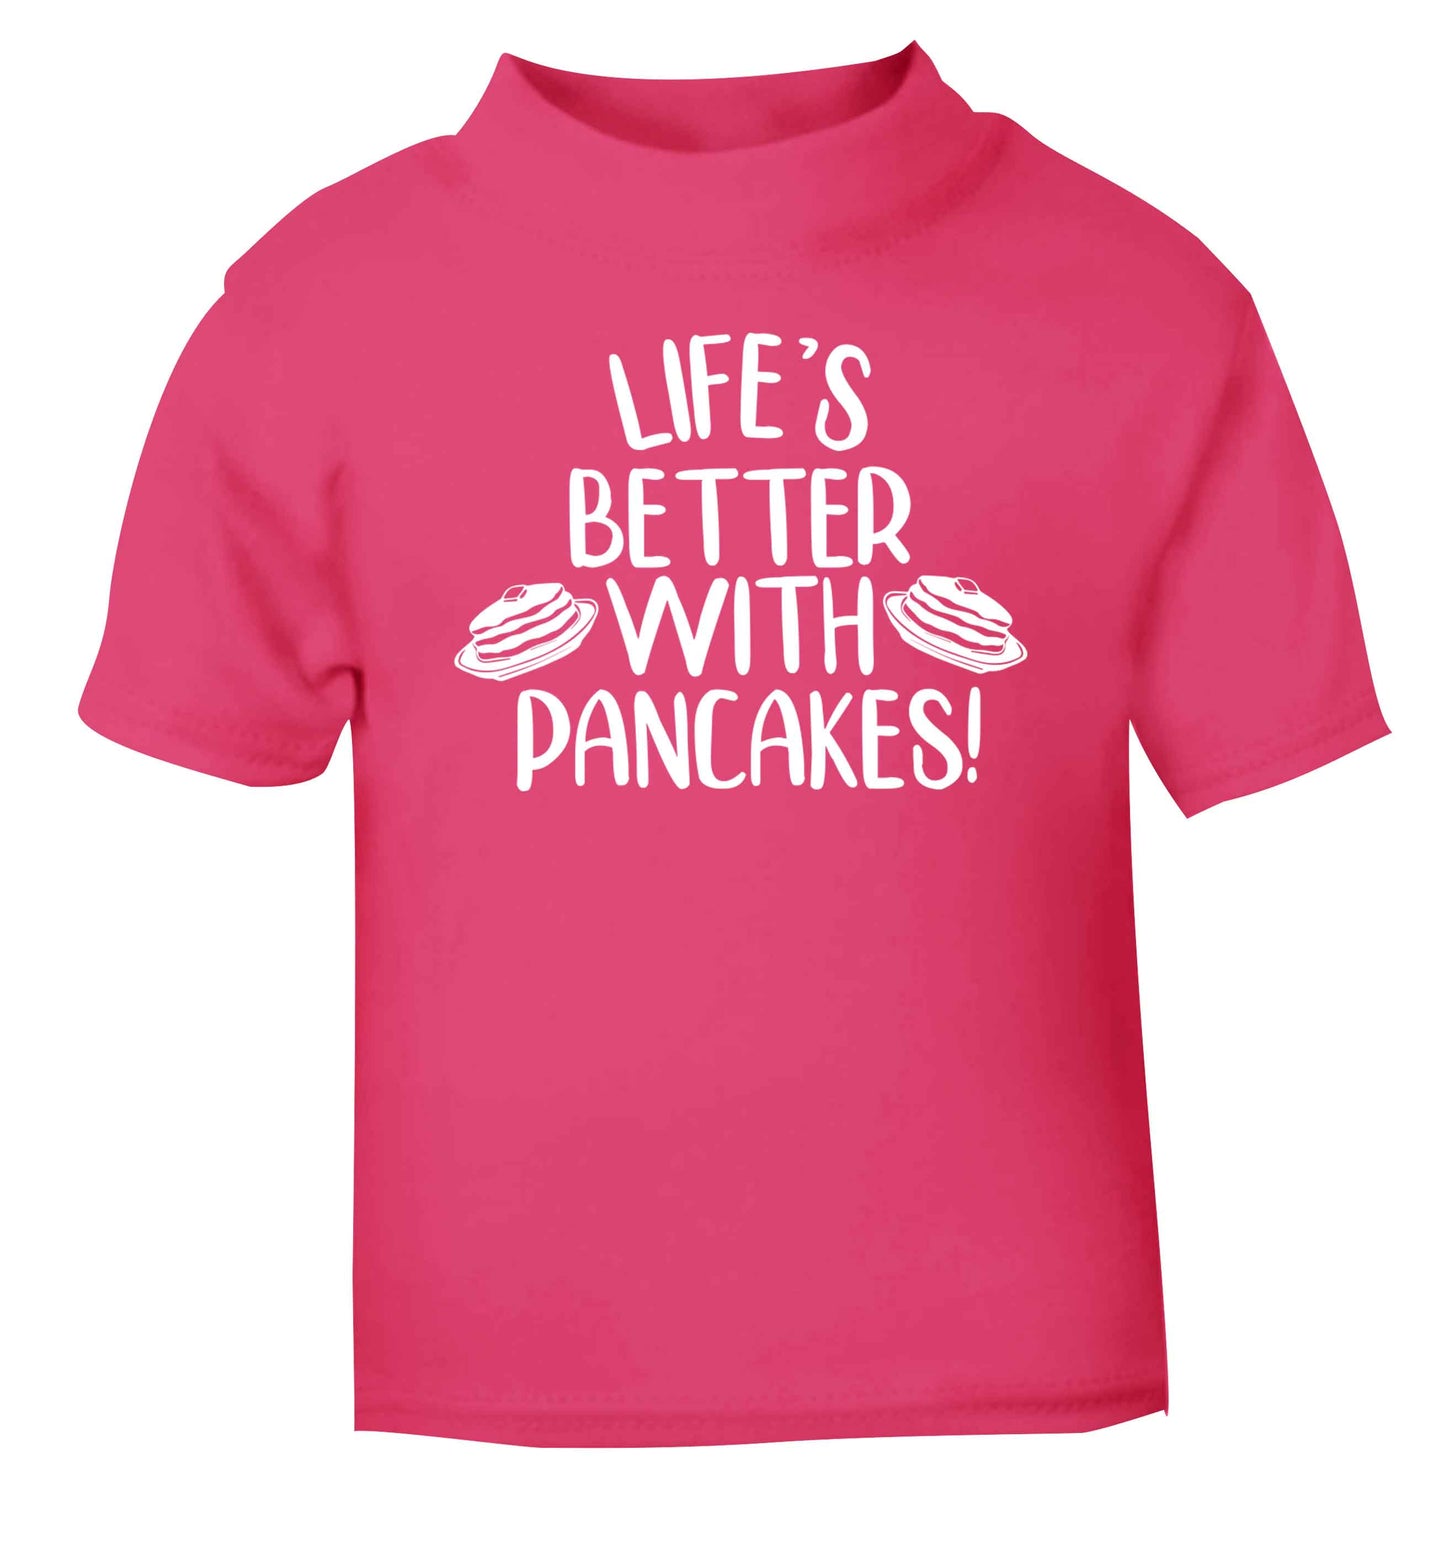 Life's better with pancakes pink baby toddler Tshirt 2 Years